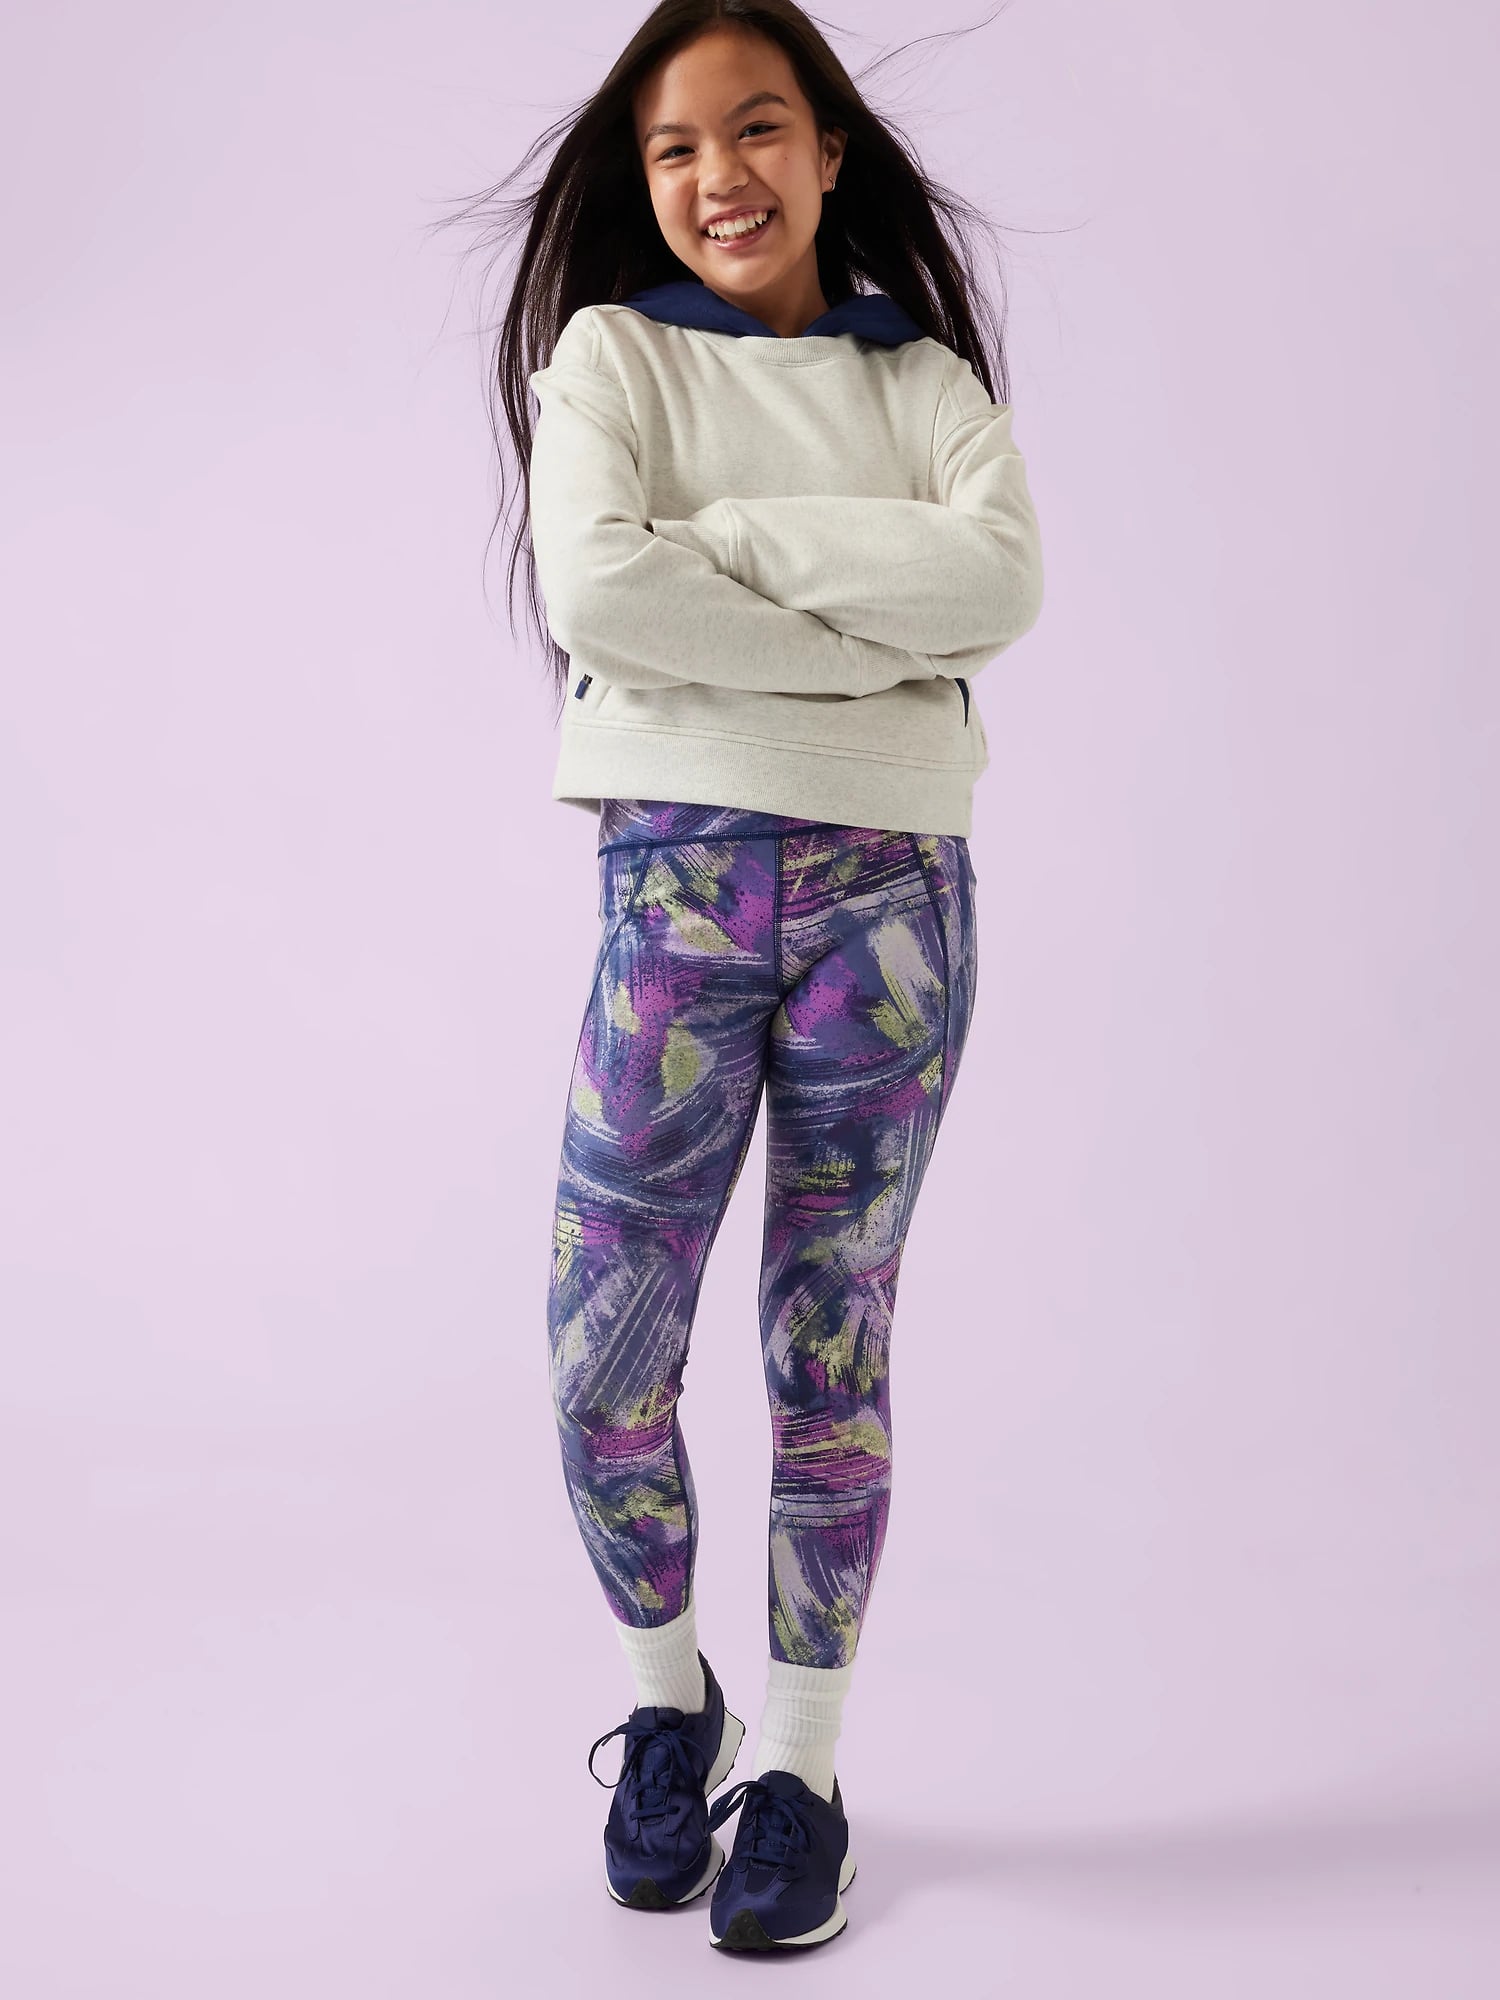 Shop Tights and Bottoms From Athleta Girl For Back to School